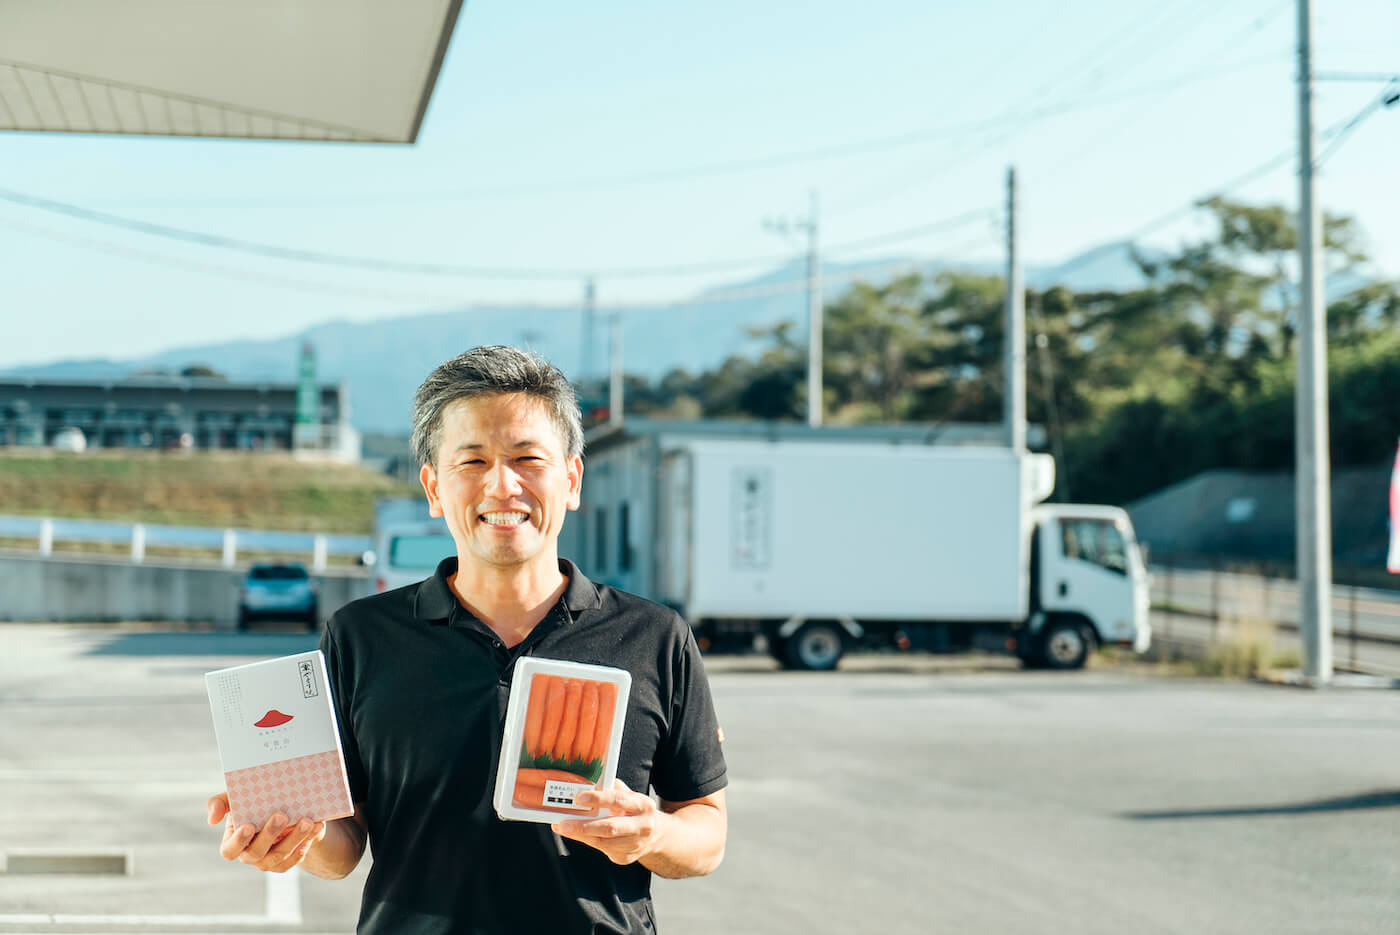 Takashi Baba - Creating a local trading company that enriches the lives of the people of Itoshima, 馬場孝志 – 糸島の人たちが潤う「糸島の地域商社」を目指して